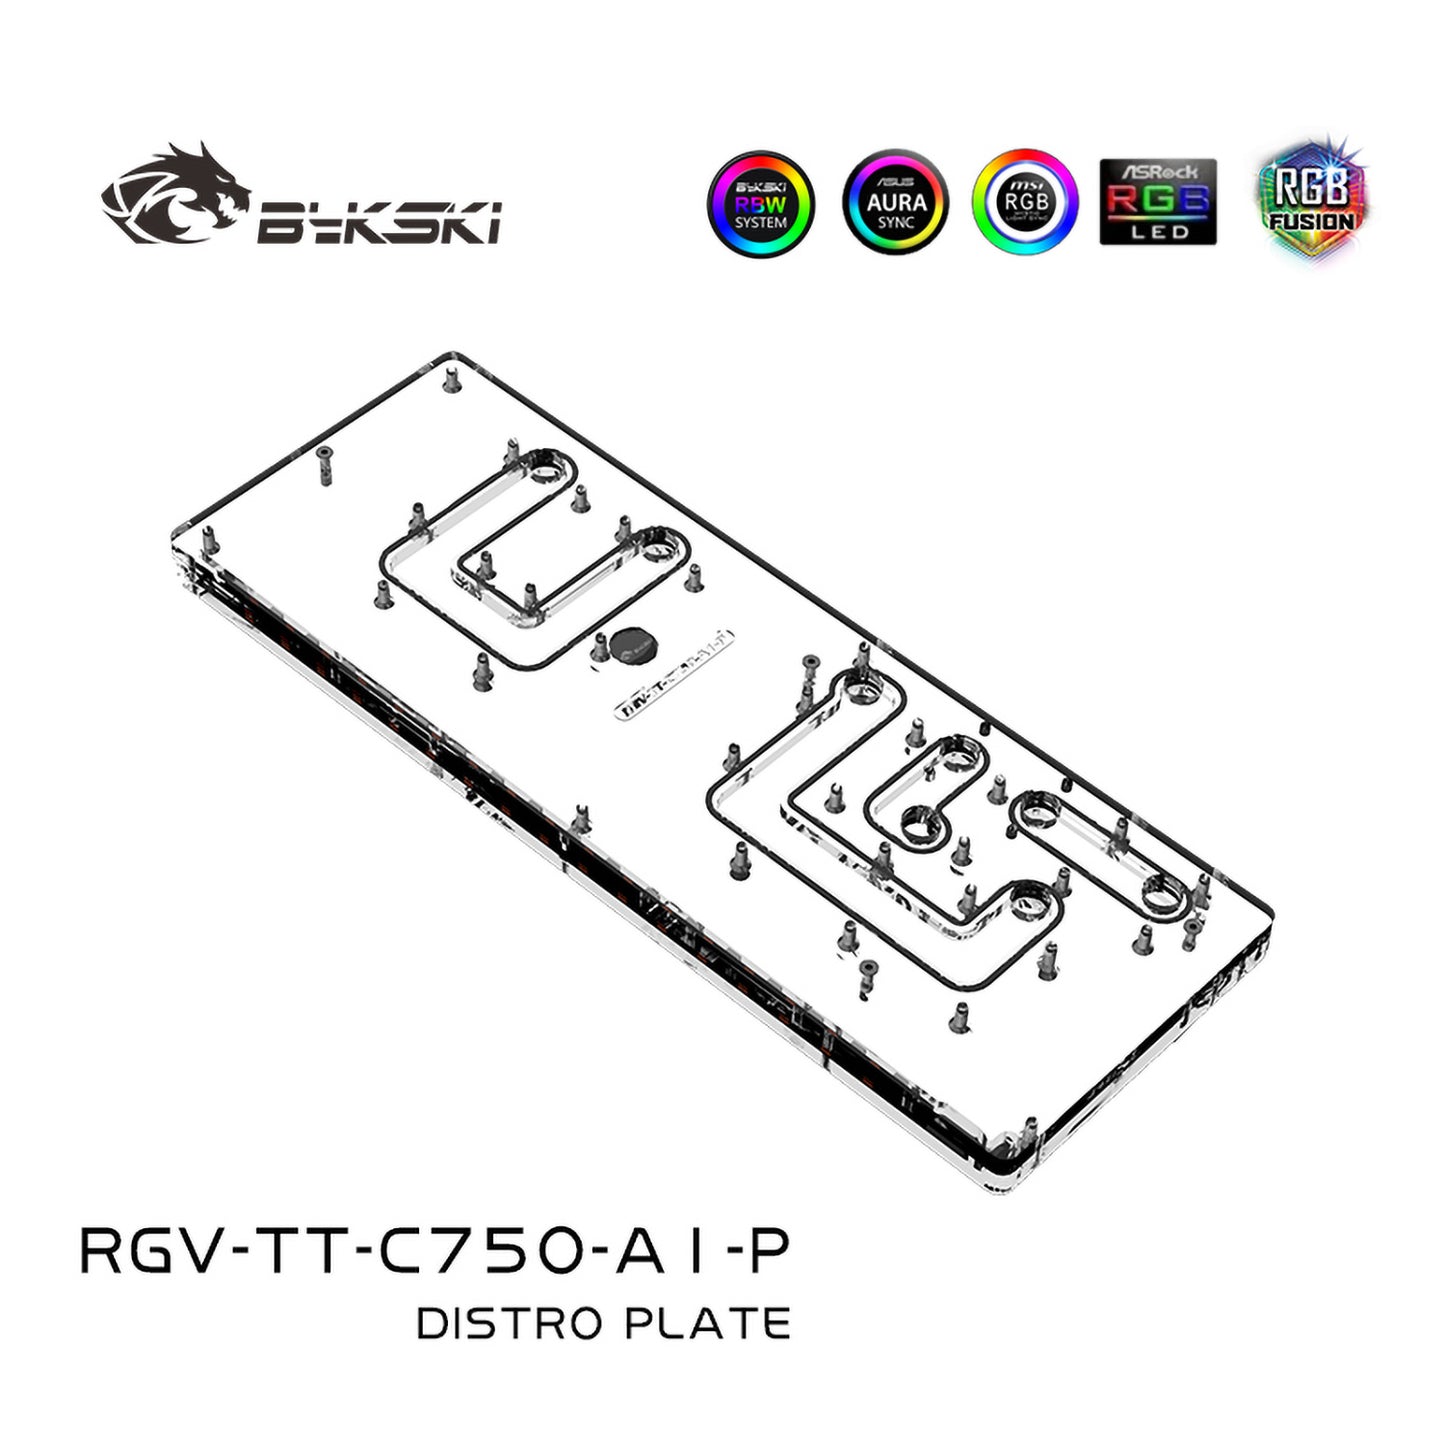 Bykski Distro Plate For Thermaltake C750 A1 Case, 5V A-RGB Acrylic Waterway Board, Complete Kit For Water Cooling Loop, RGV-TT-C750-P